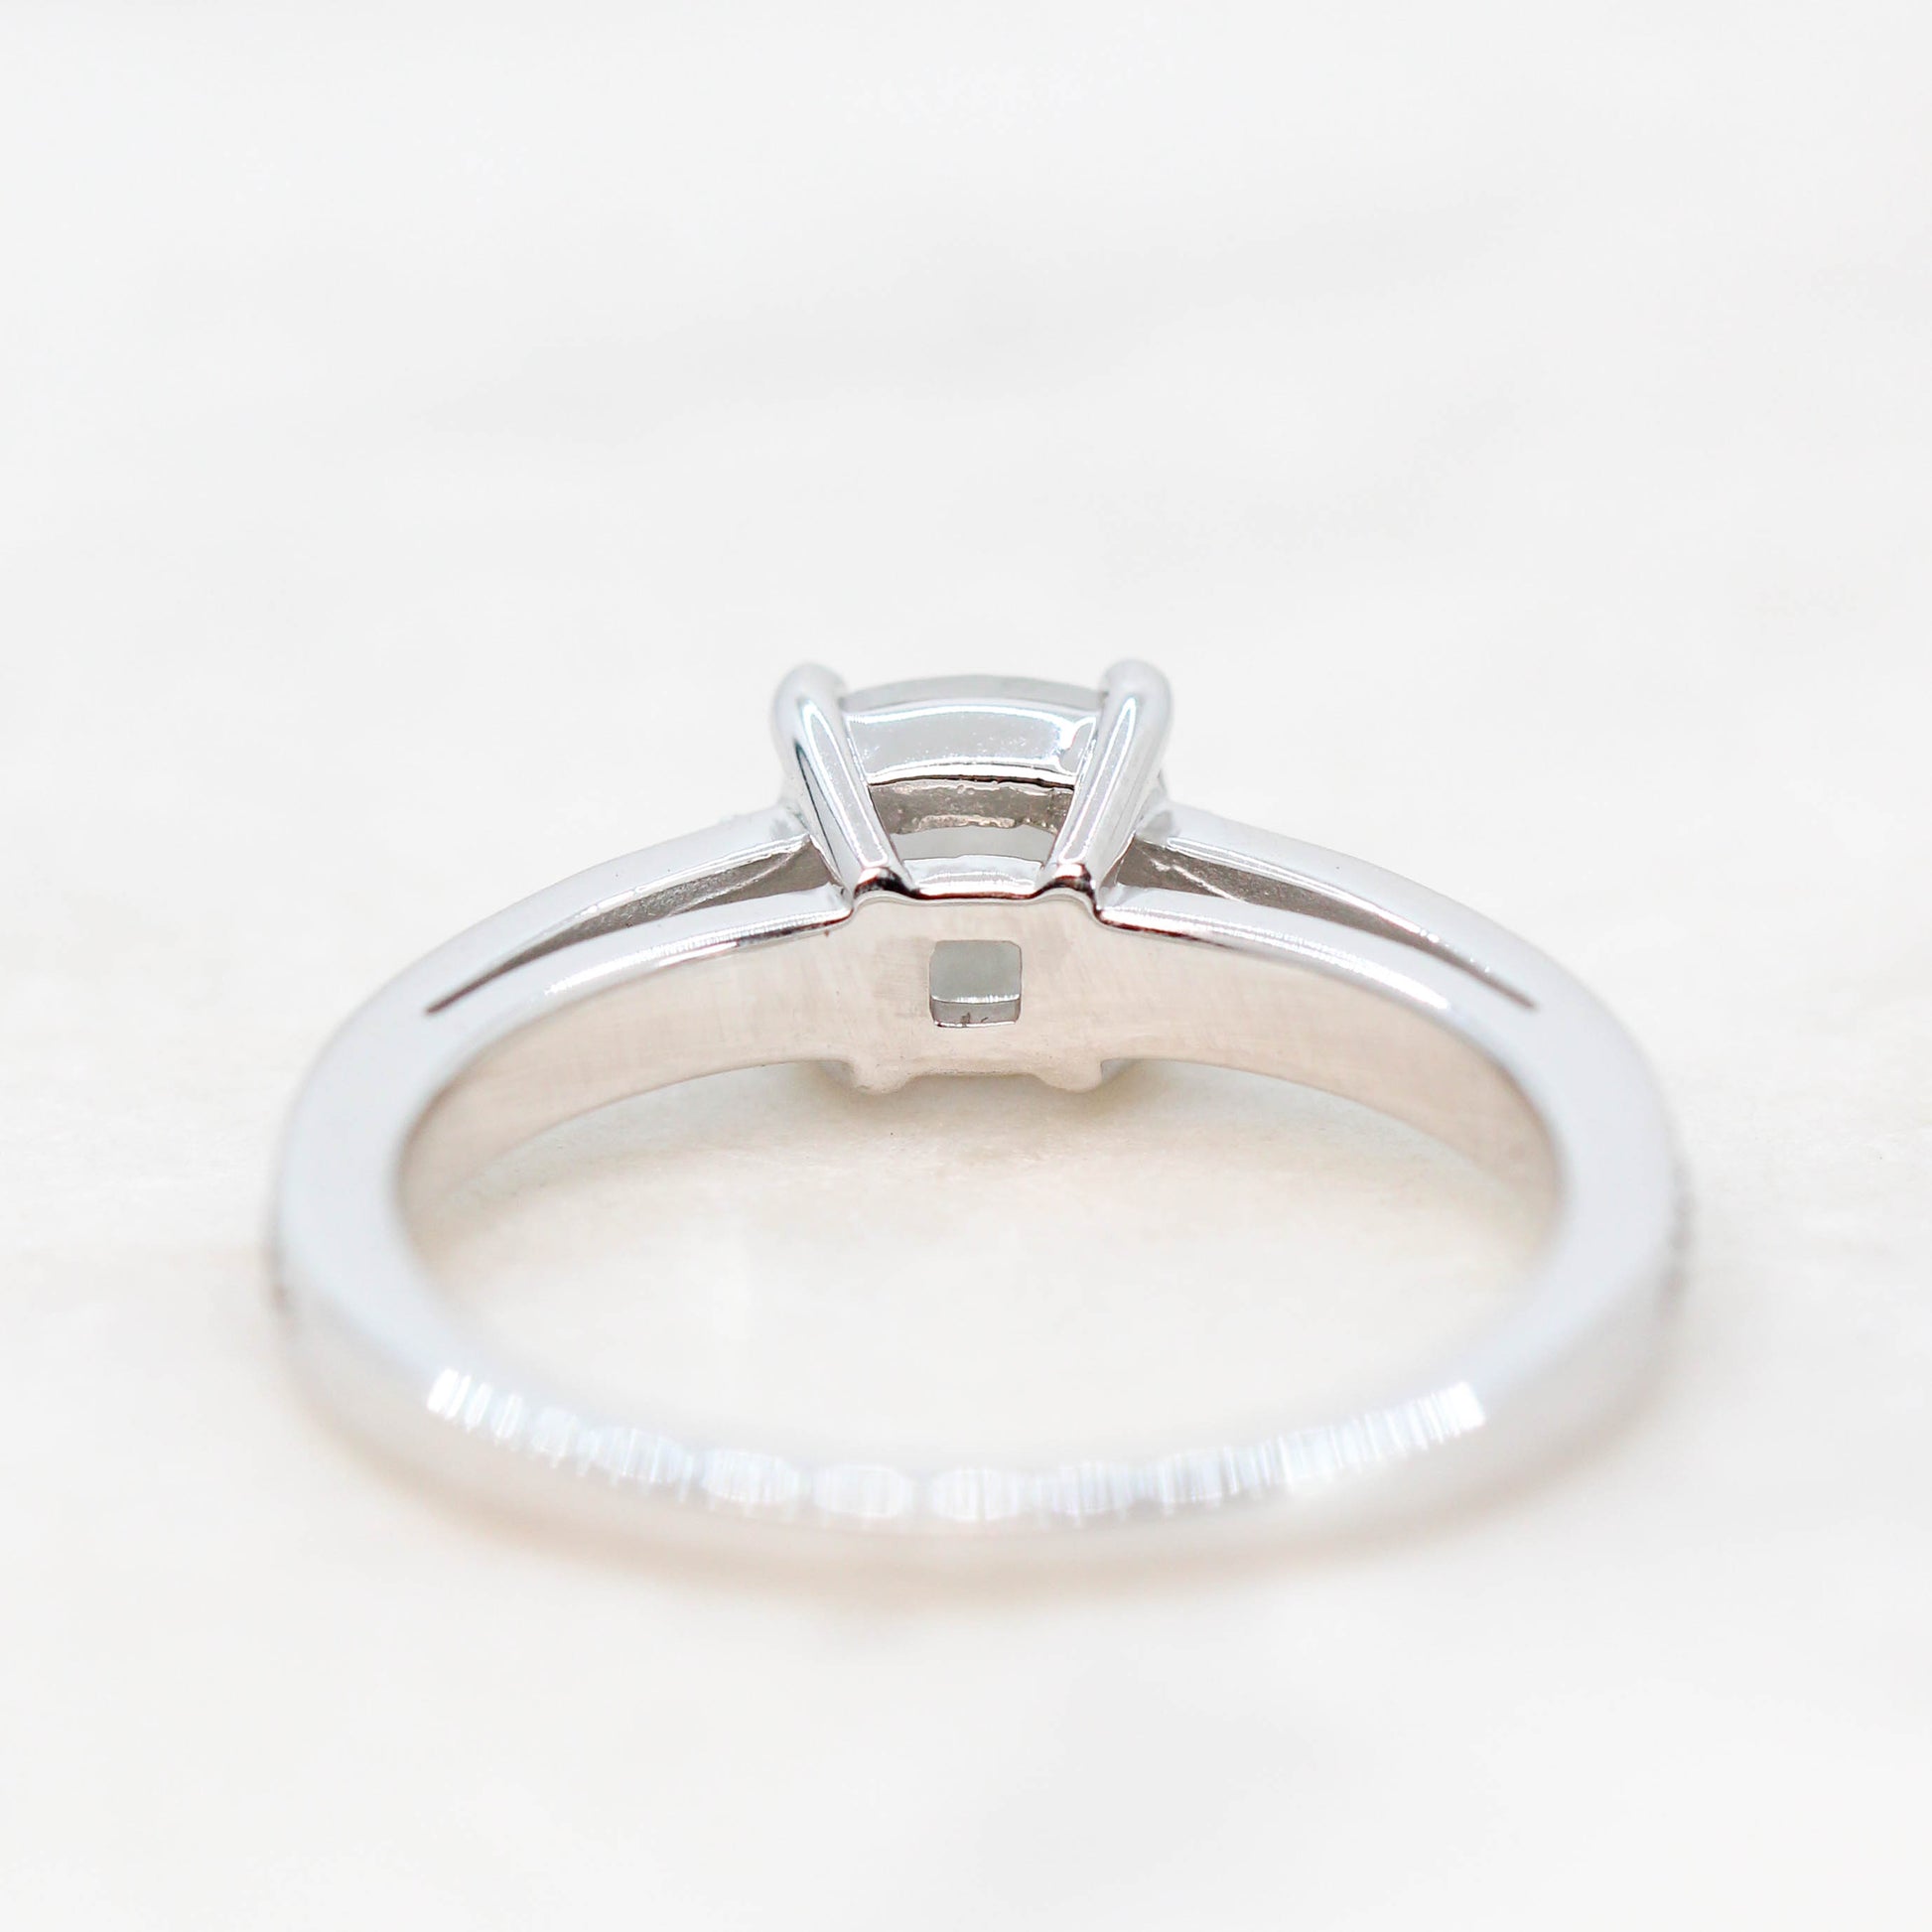 Beckett Ring with a 0.80 Carat Misty Gray Cushion Cut Diamond and Green Accent Diamonds in 14k White Gold - Ready to Size and Ship - Midwinter Co. Alternative Bridal Rings and Modern Fine Jewelry